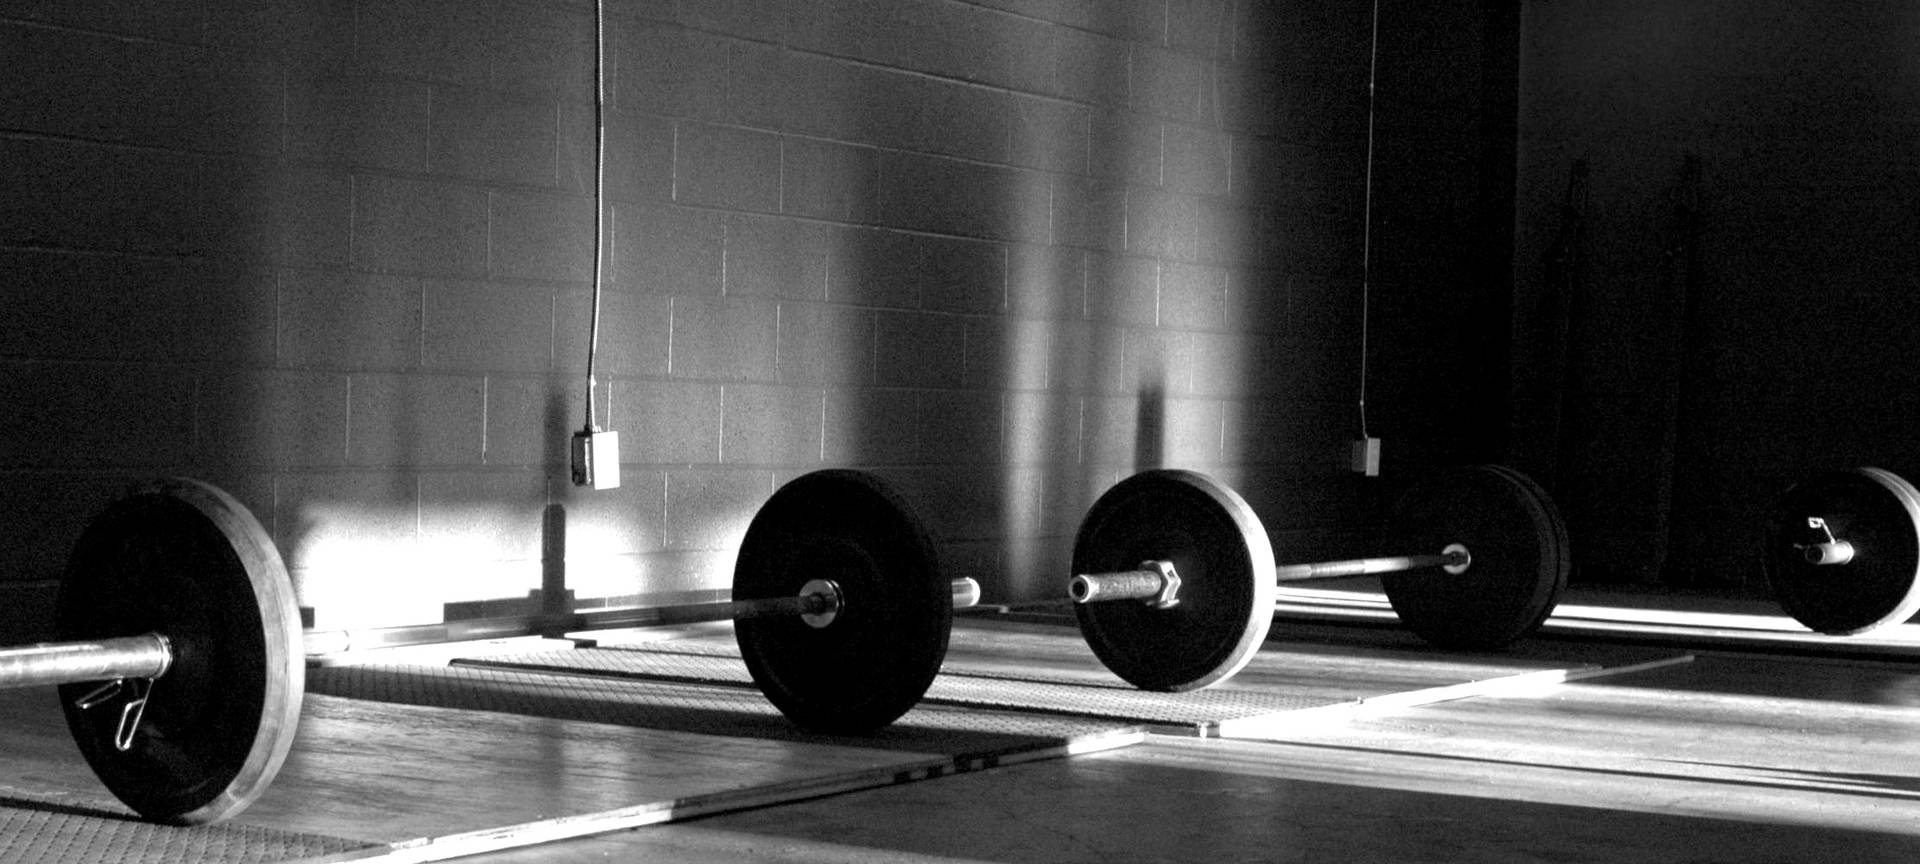 Barbells On Rubber Mats Background